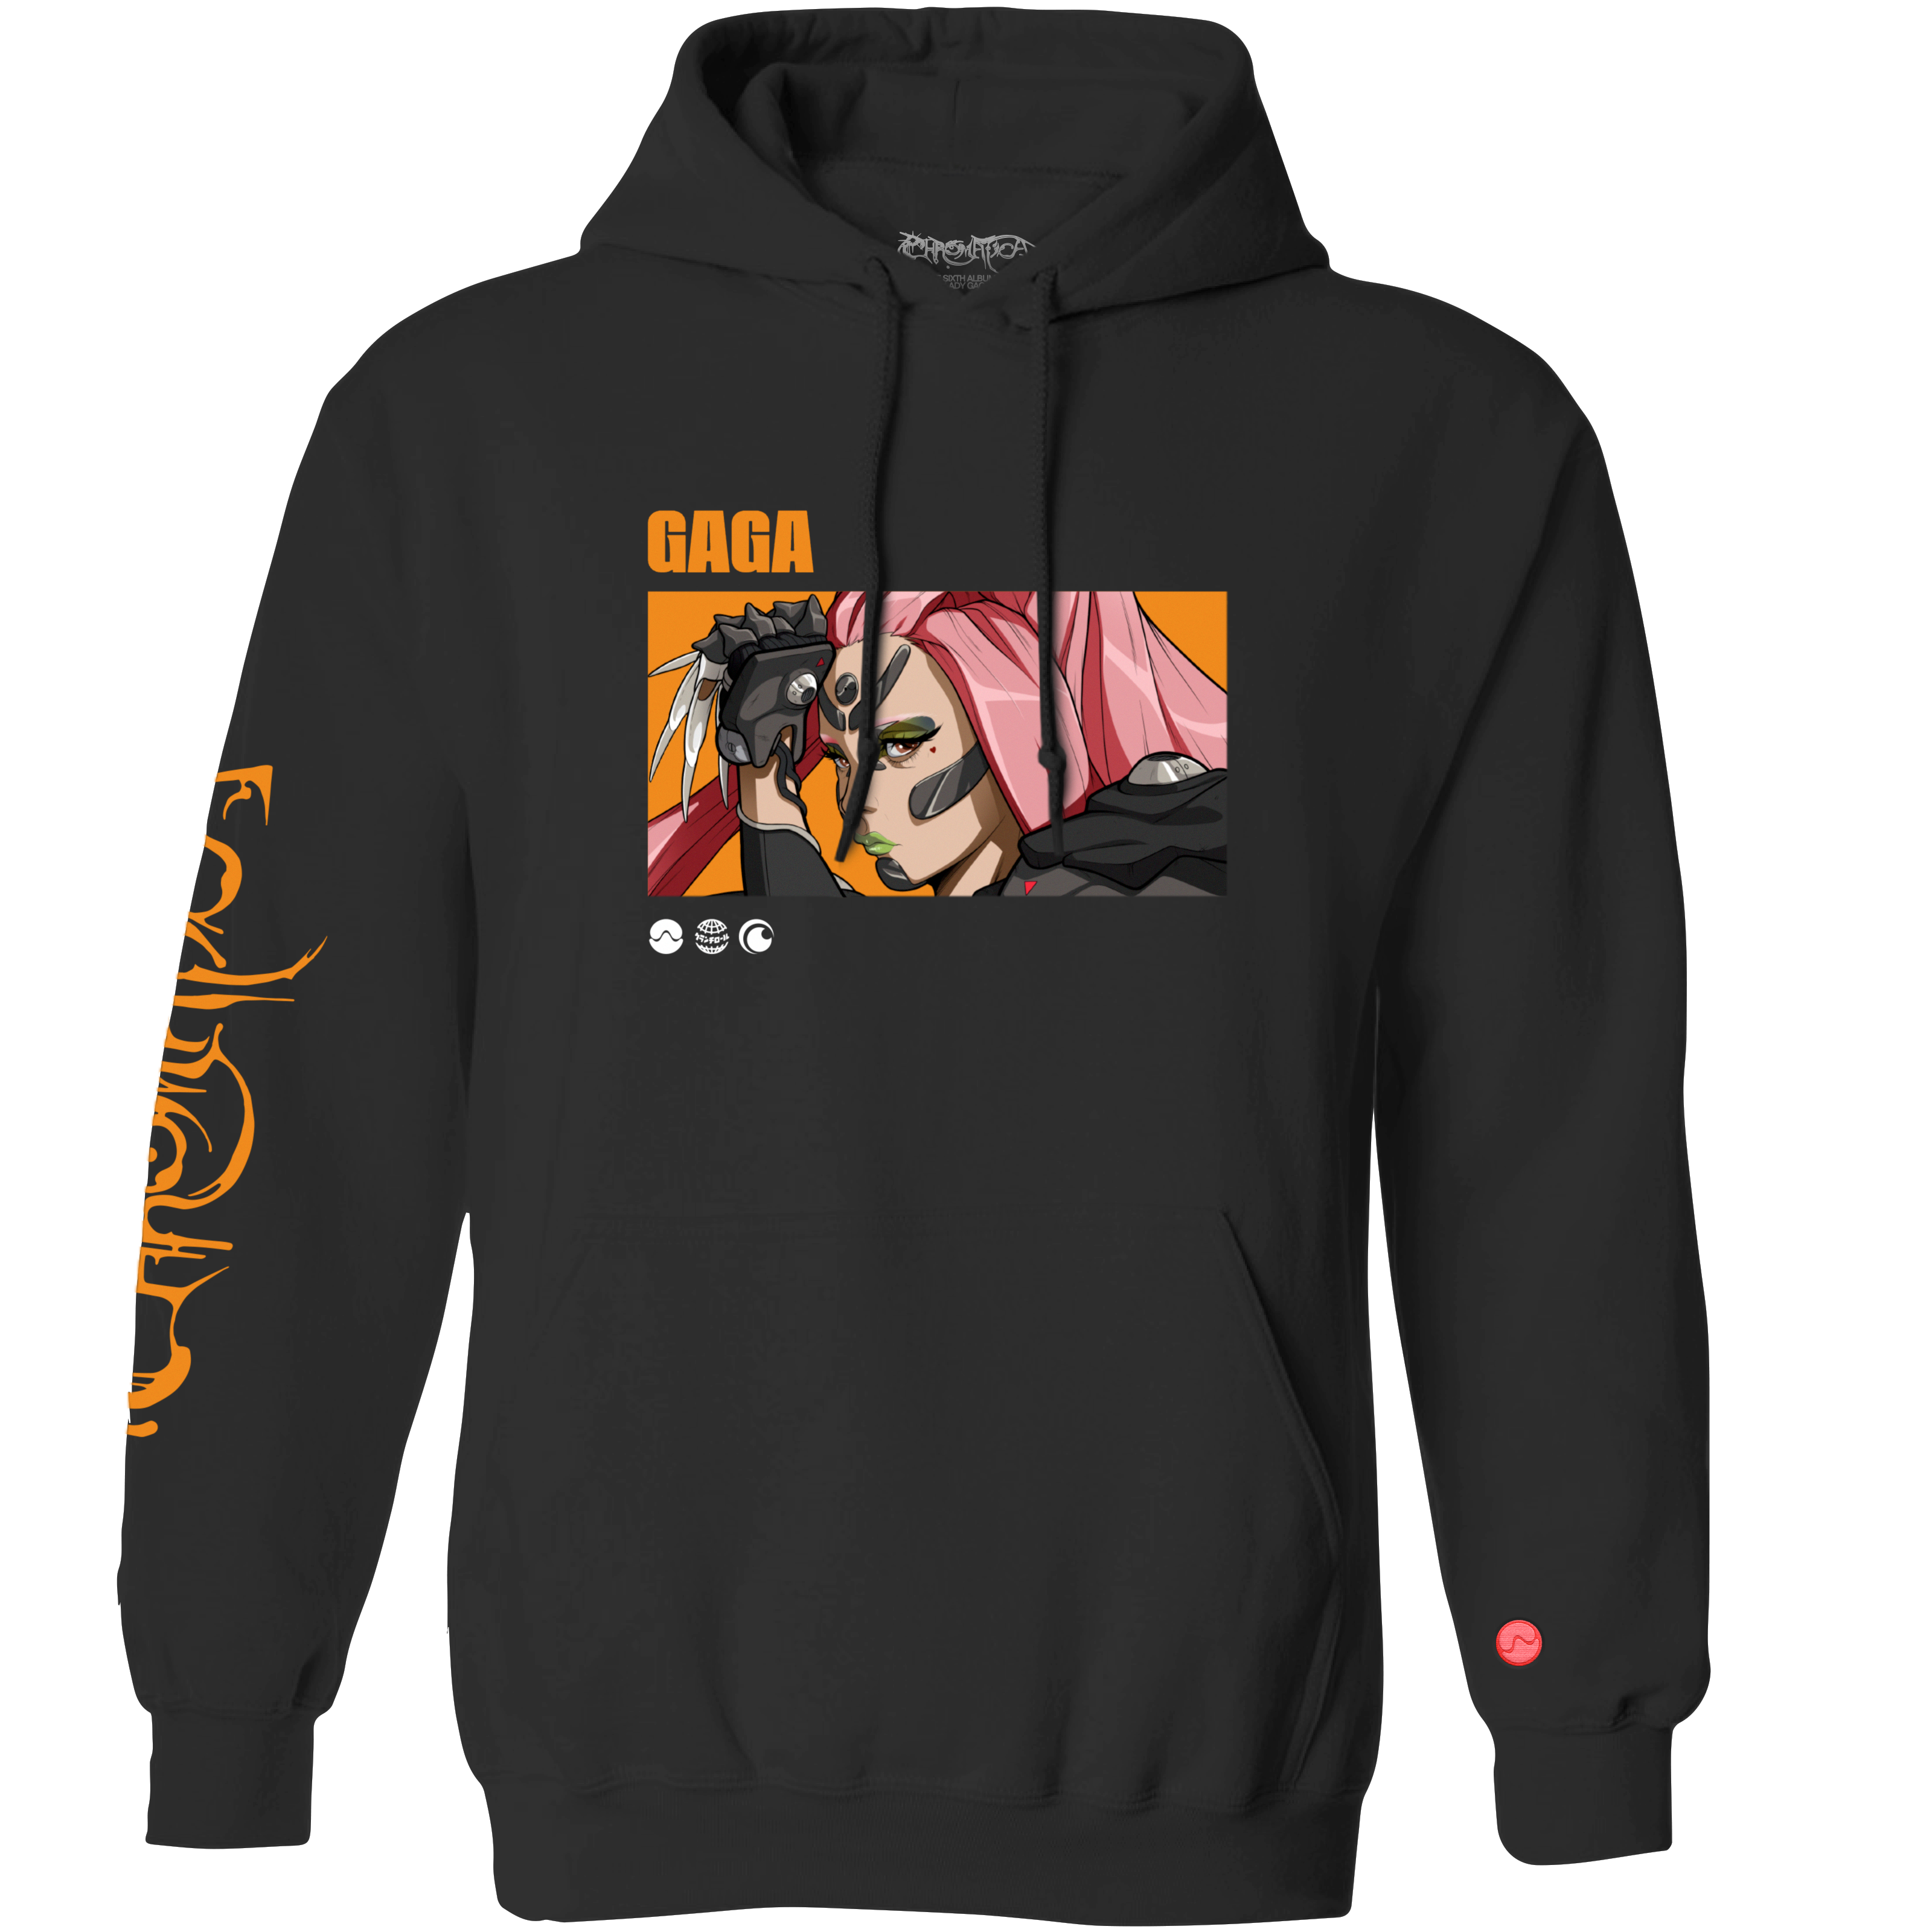 CR Loves Lady Gaga - No One Thing Is Greater Than Another Hoodie image count 8